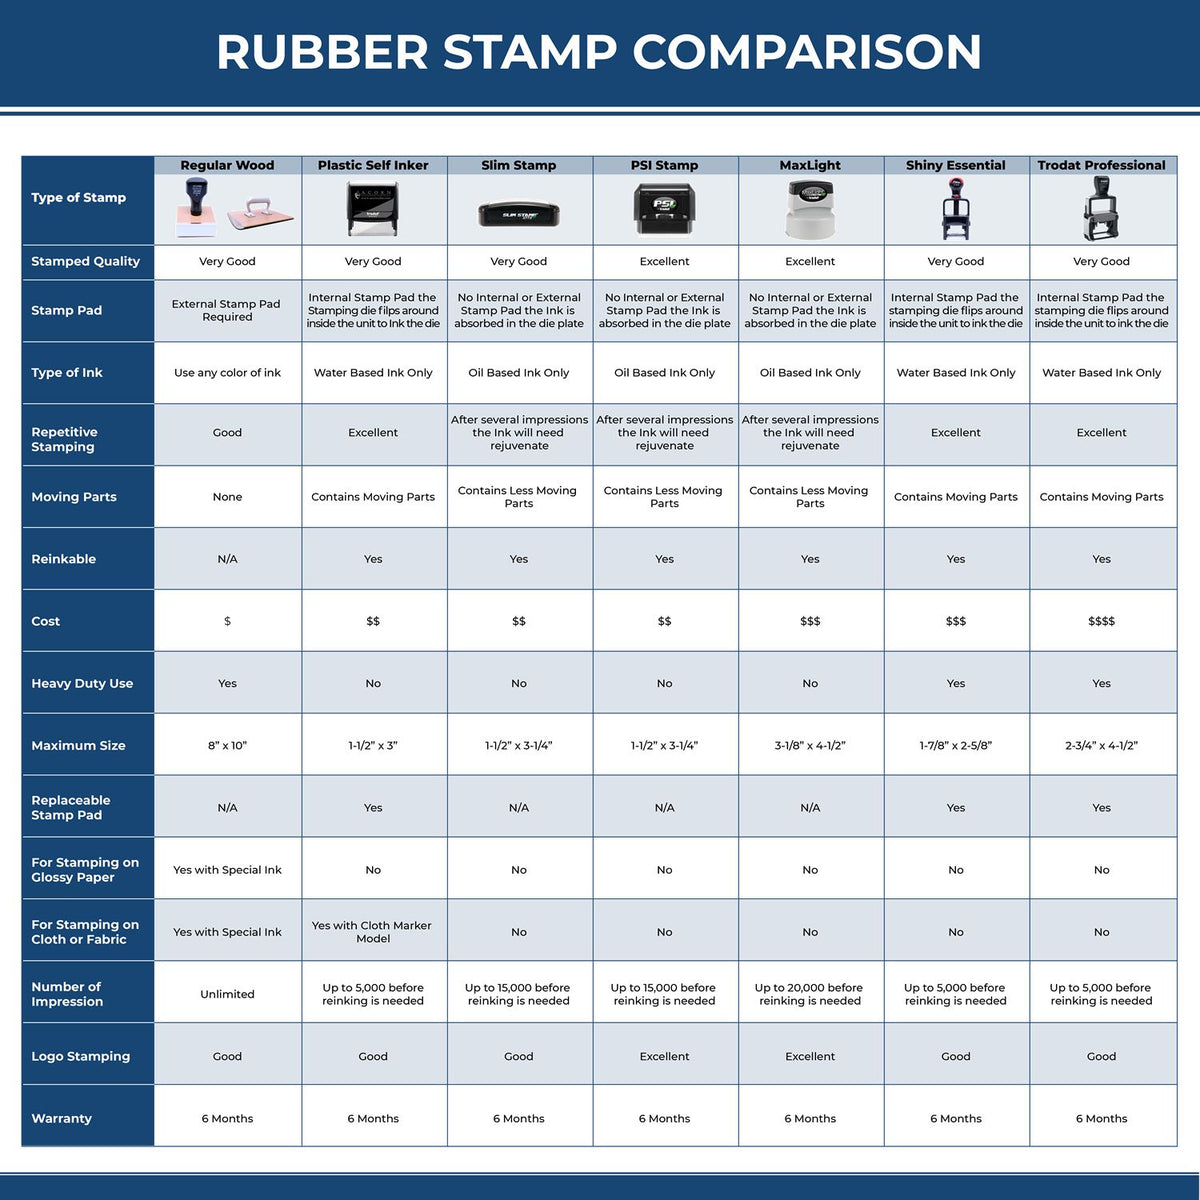 A comparison chart for the different types of mount models available for the MaxLight Premium Pre-Inked Massachusetts State Seal Notarial Stamp.